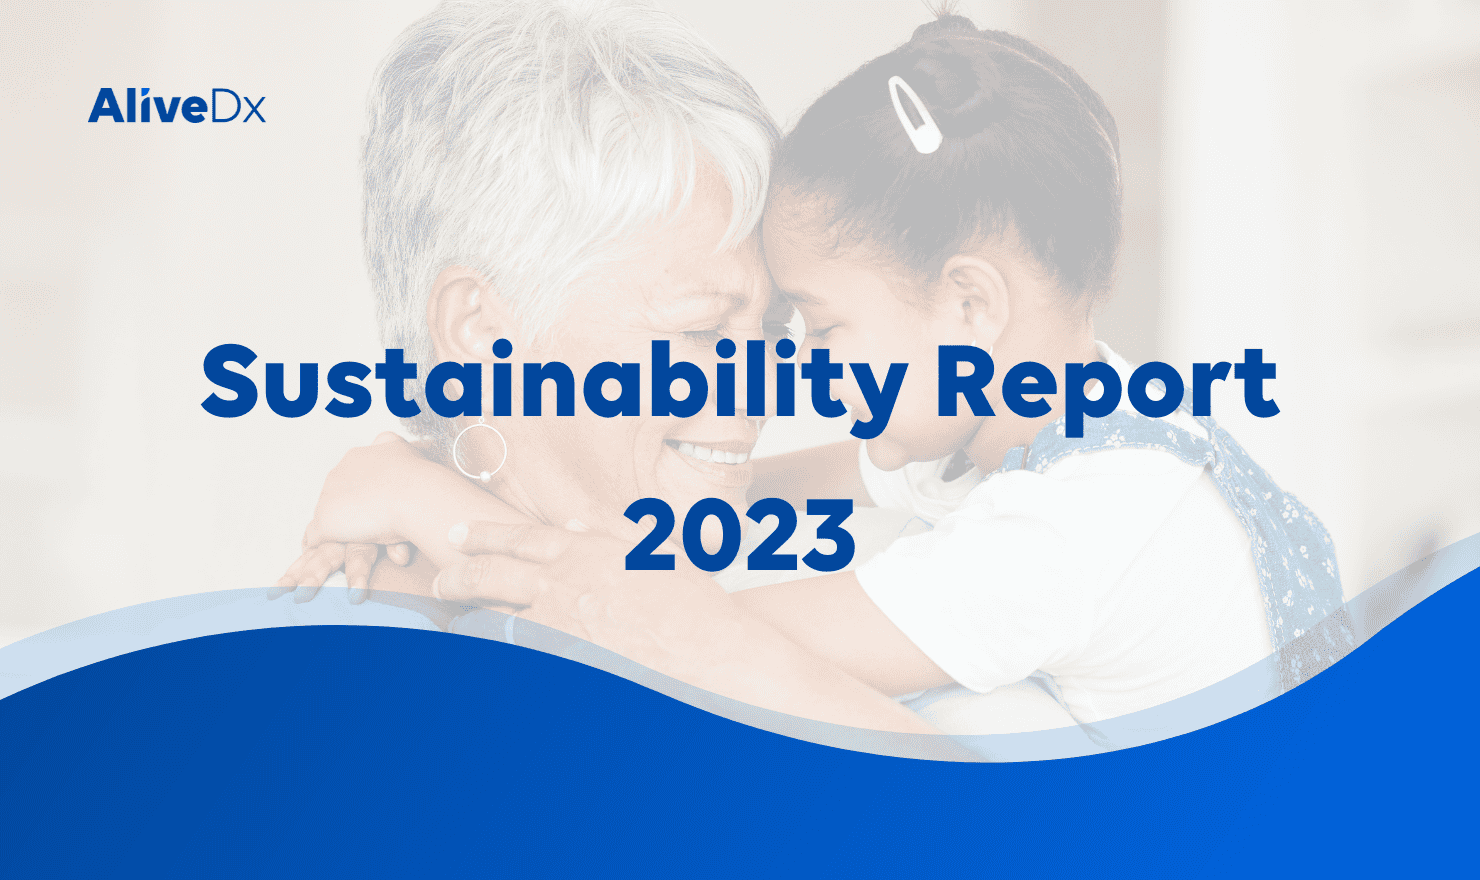 Presenting the AliveDx 2023 Sustainability Report